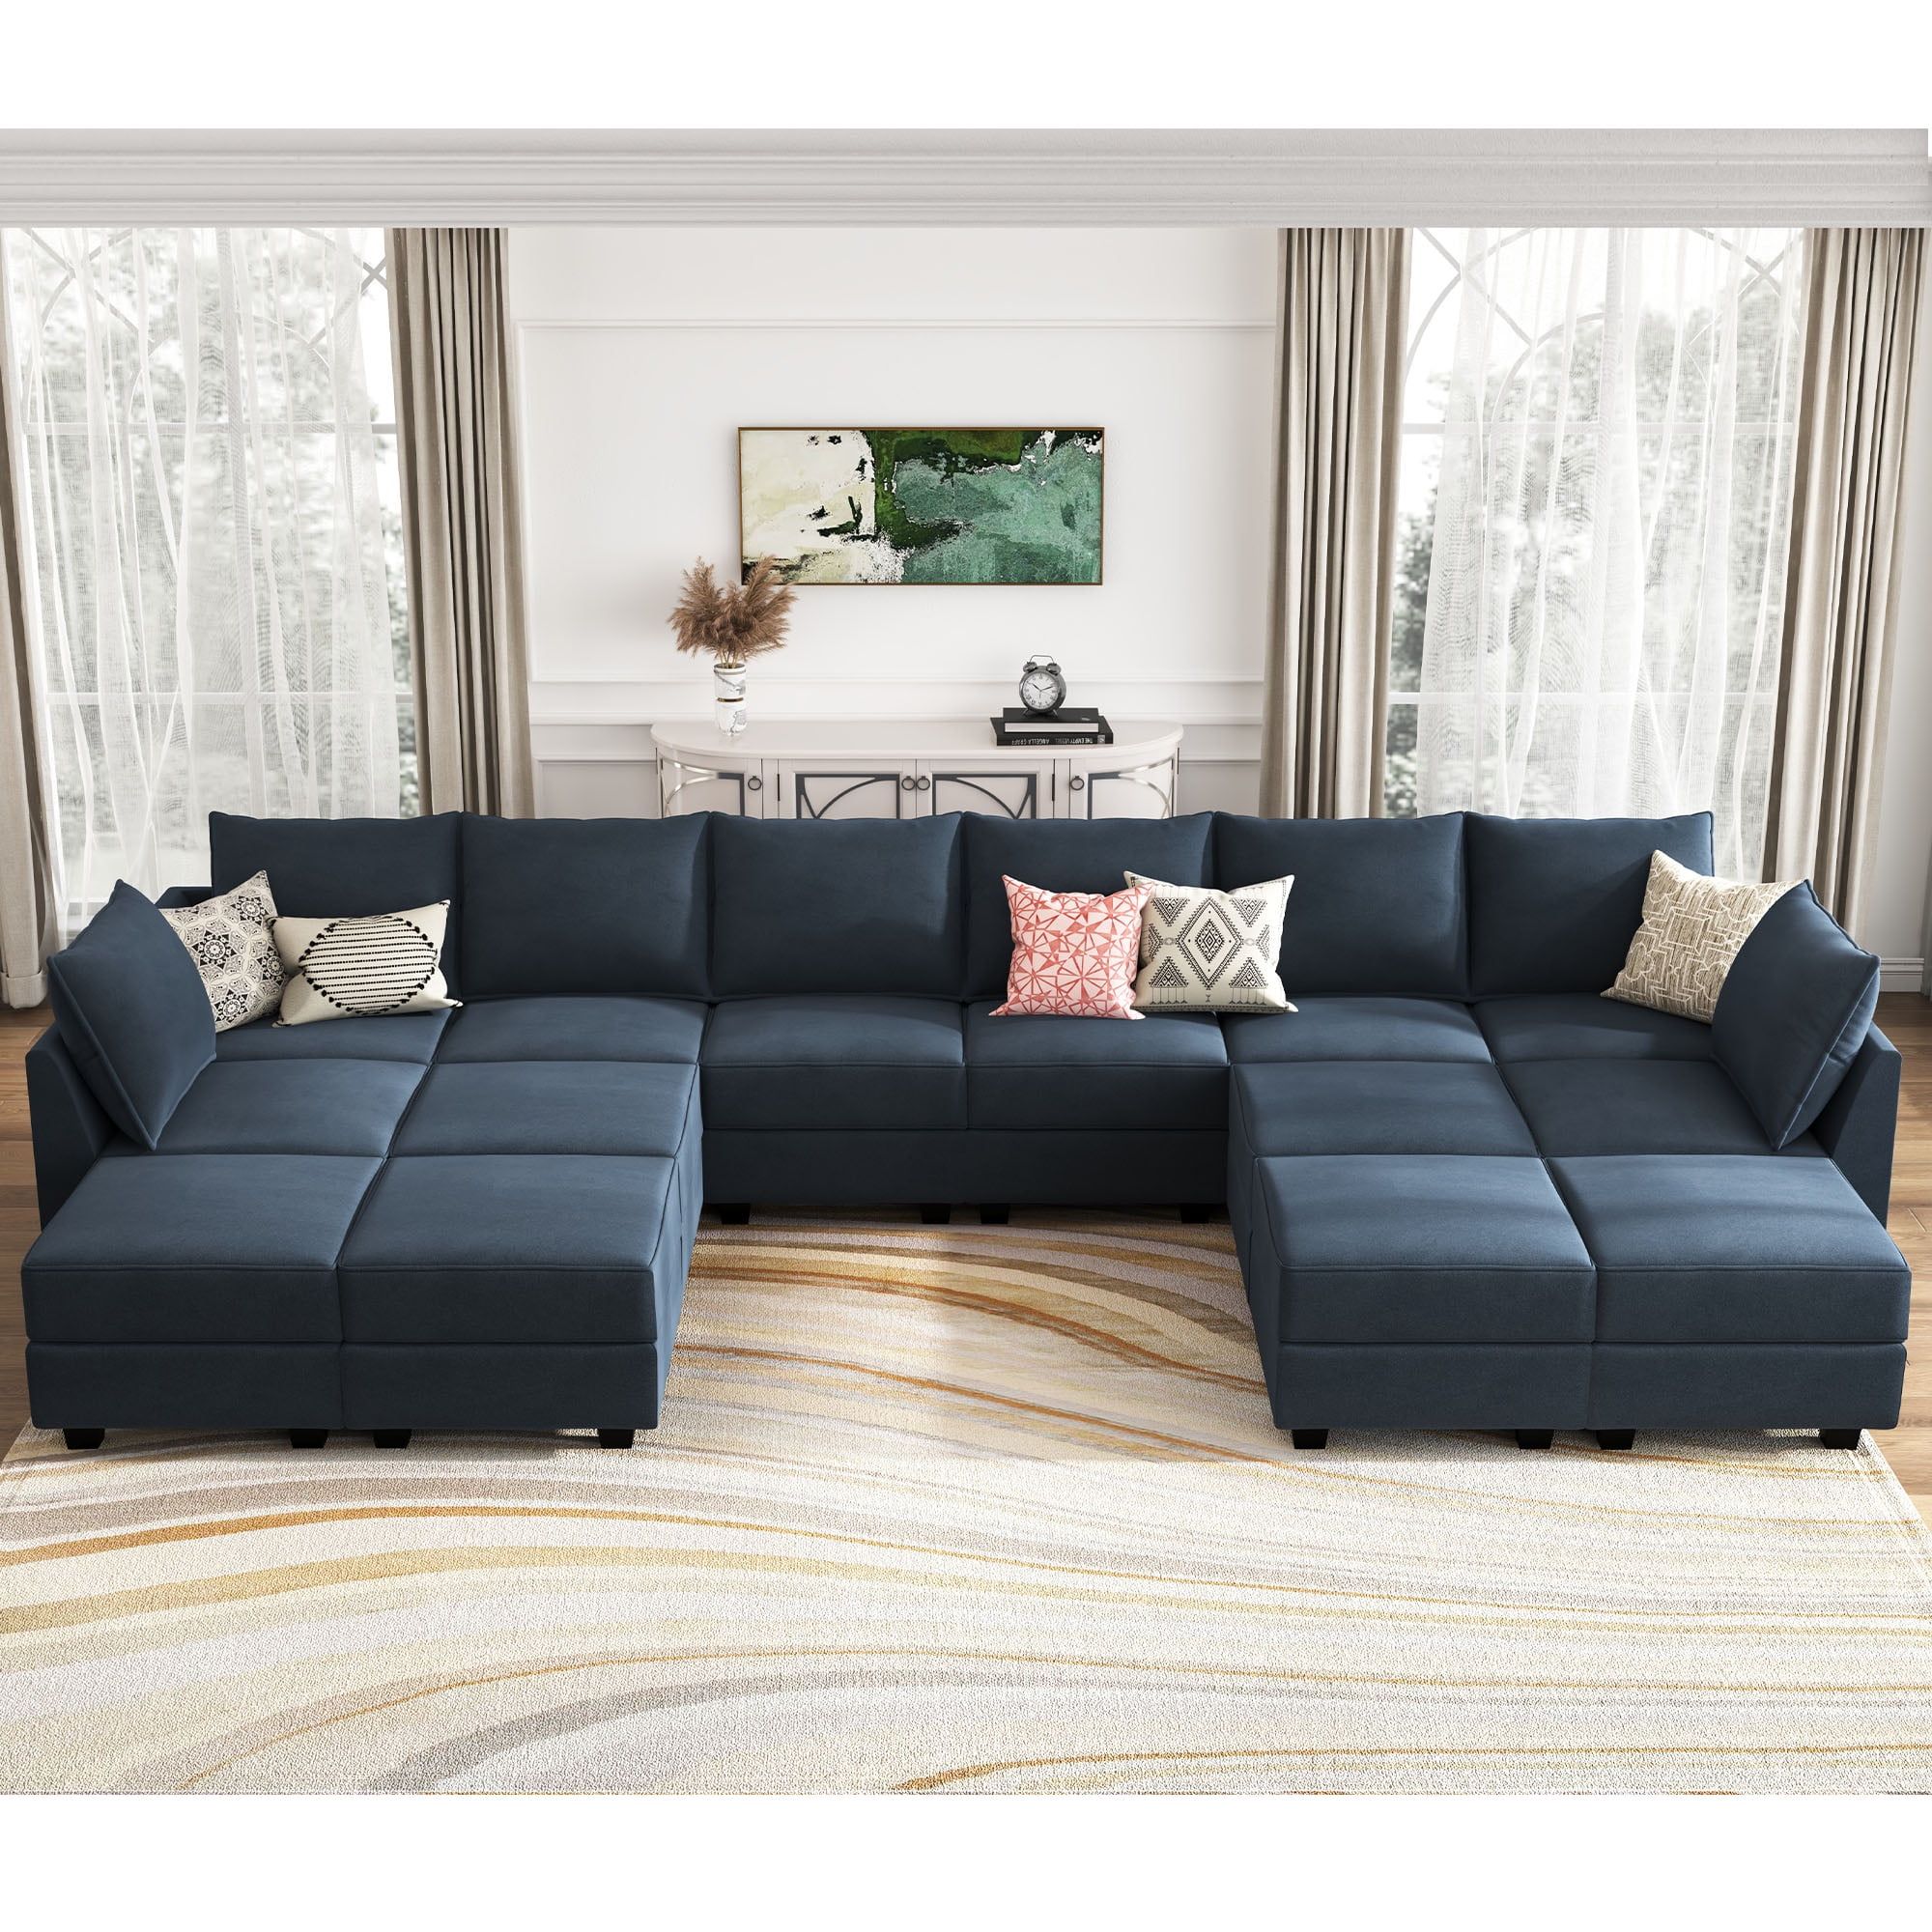 Honbay Velvet Sectional Sofa Reversible Sleeper Sofa Modular Couch For  Apartment, Navy Blue – Walmart Throughout Navy Sleeper Sofa Couches (View 2 of 15)